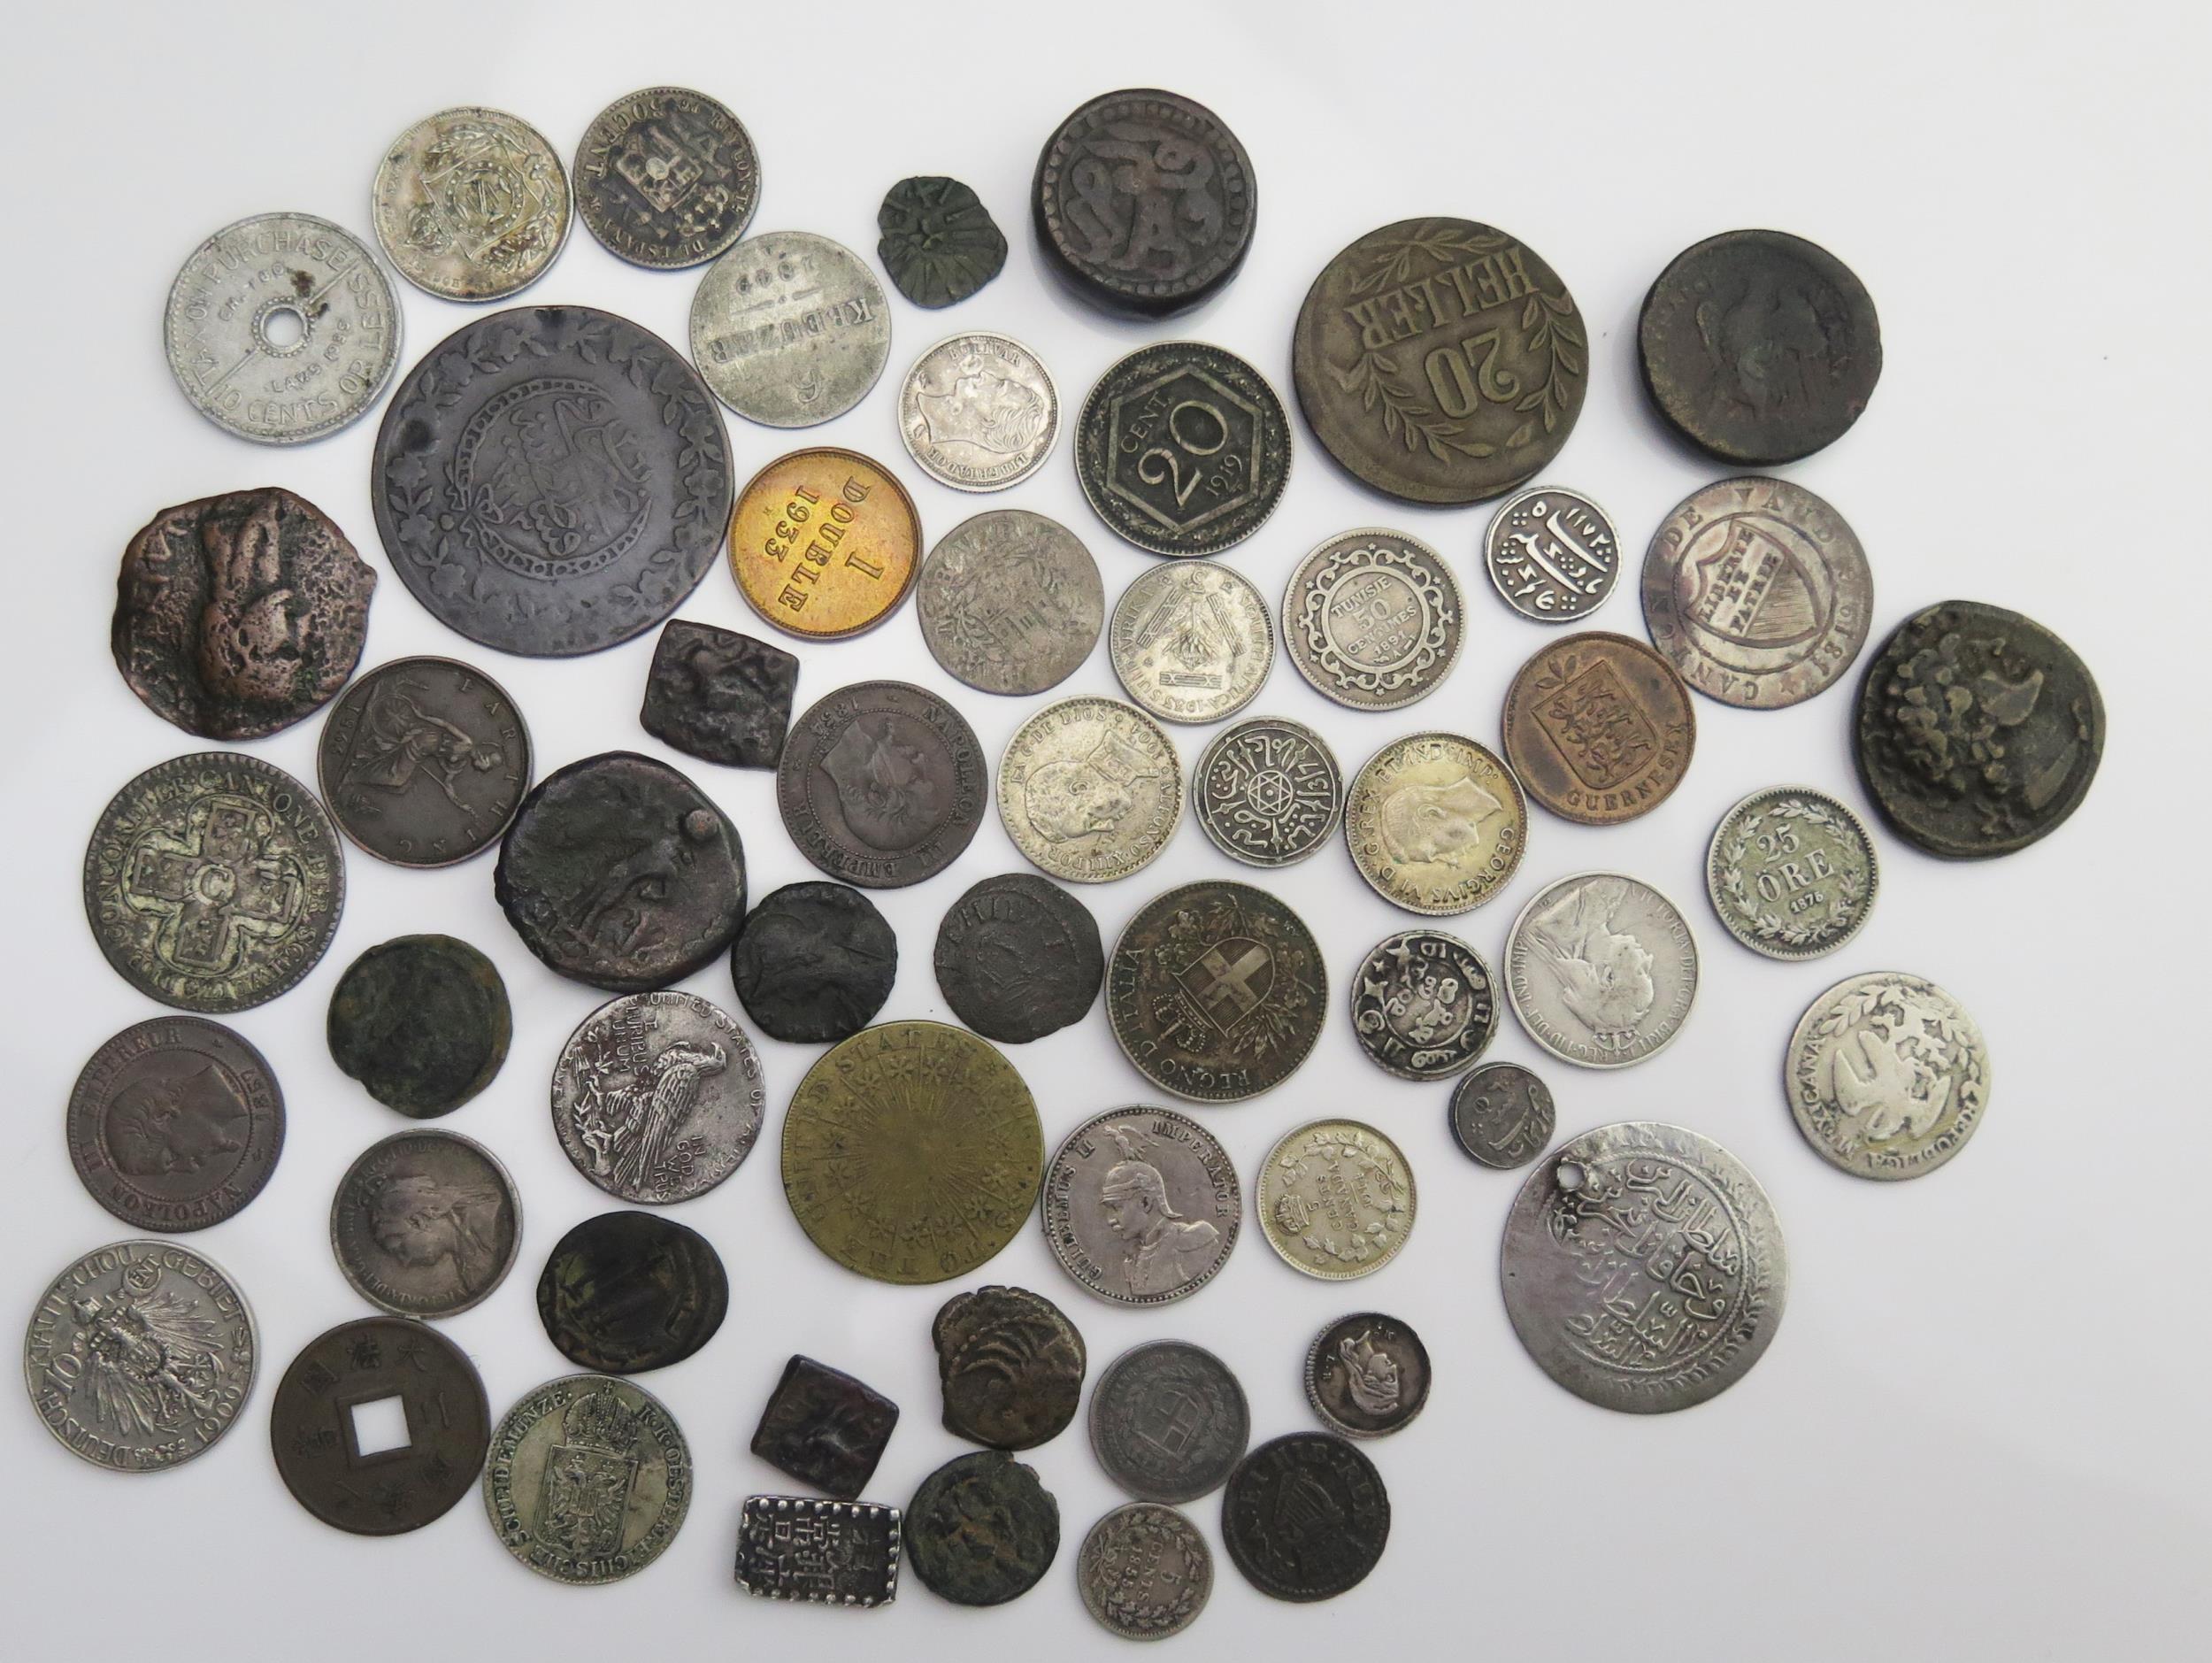 Varied mix group of World coins and tokens including Klautschou China 10 cents, George Washington - Image 2 of 2